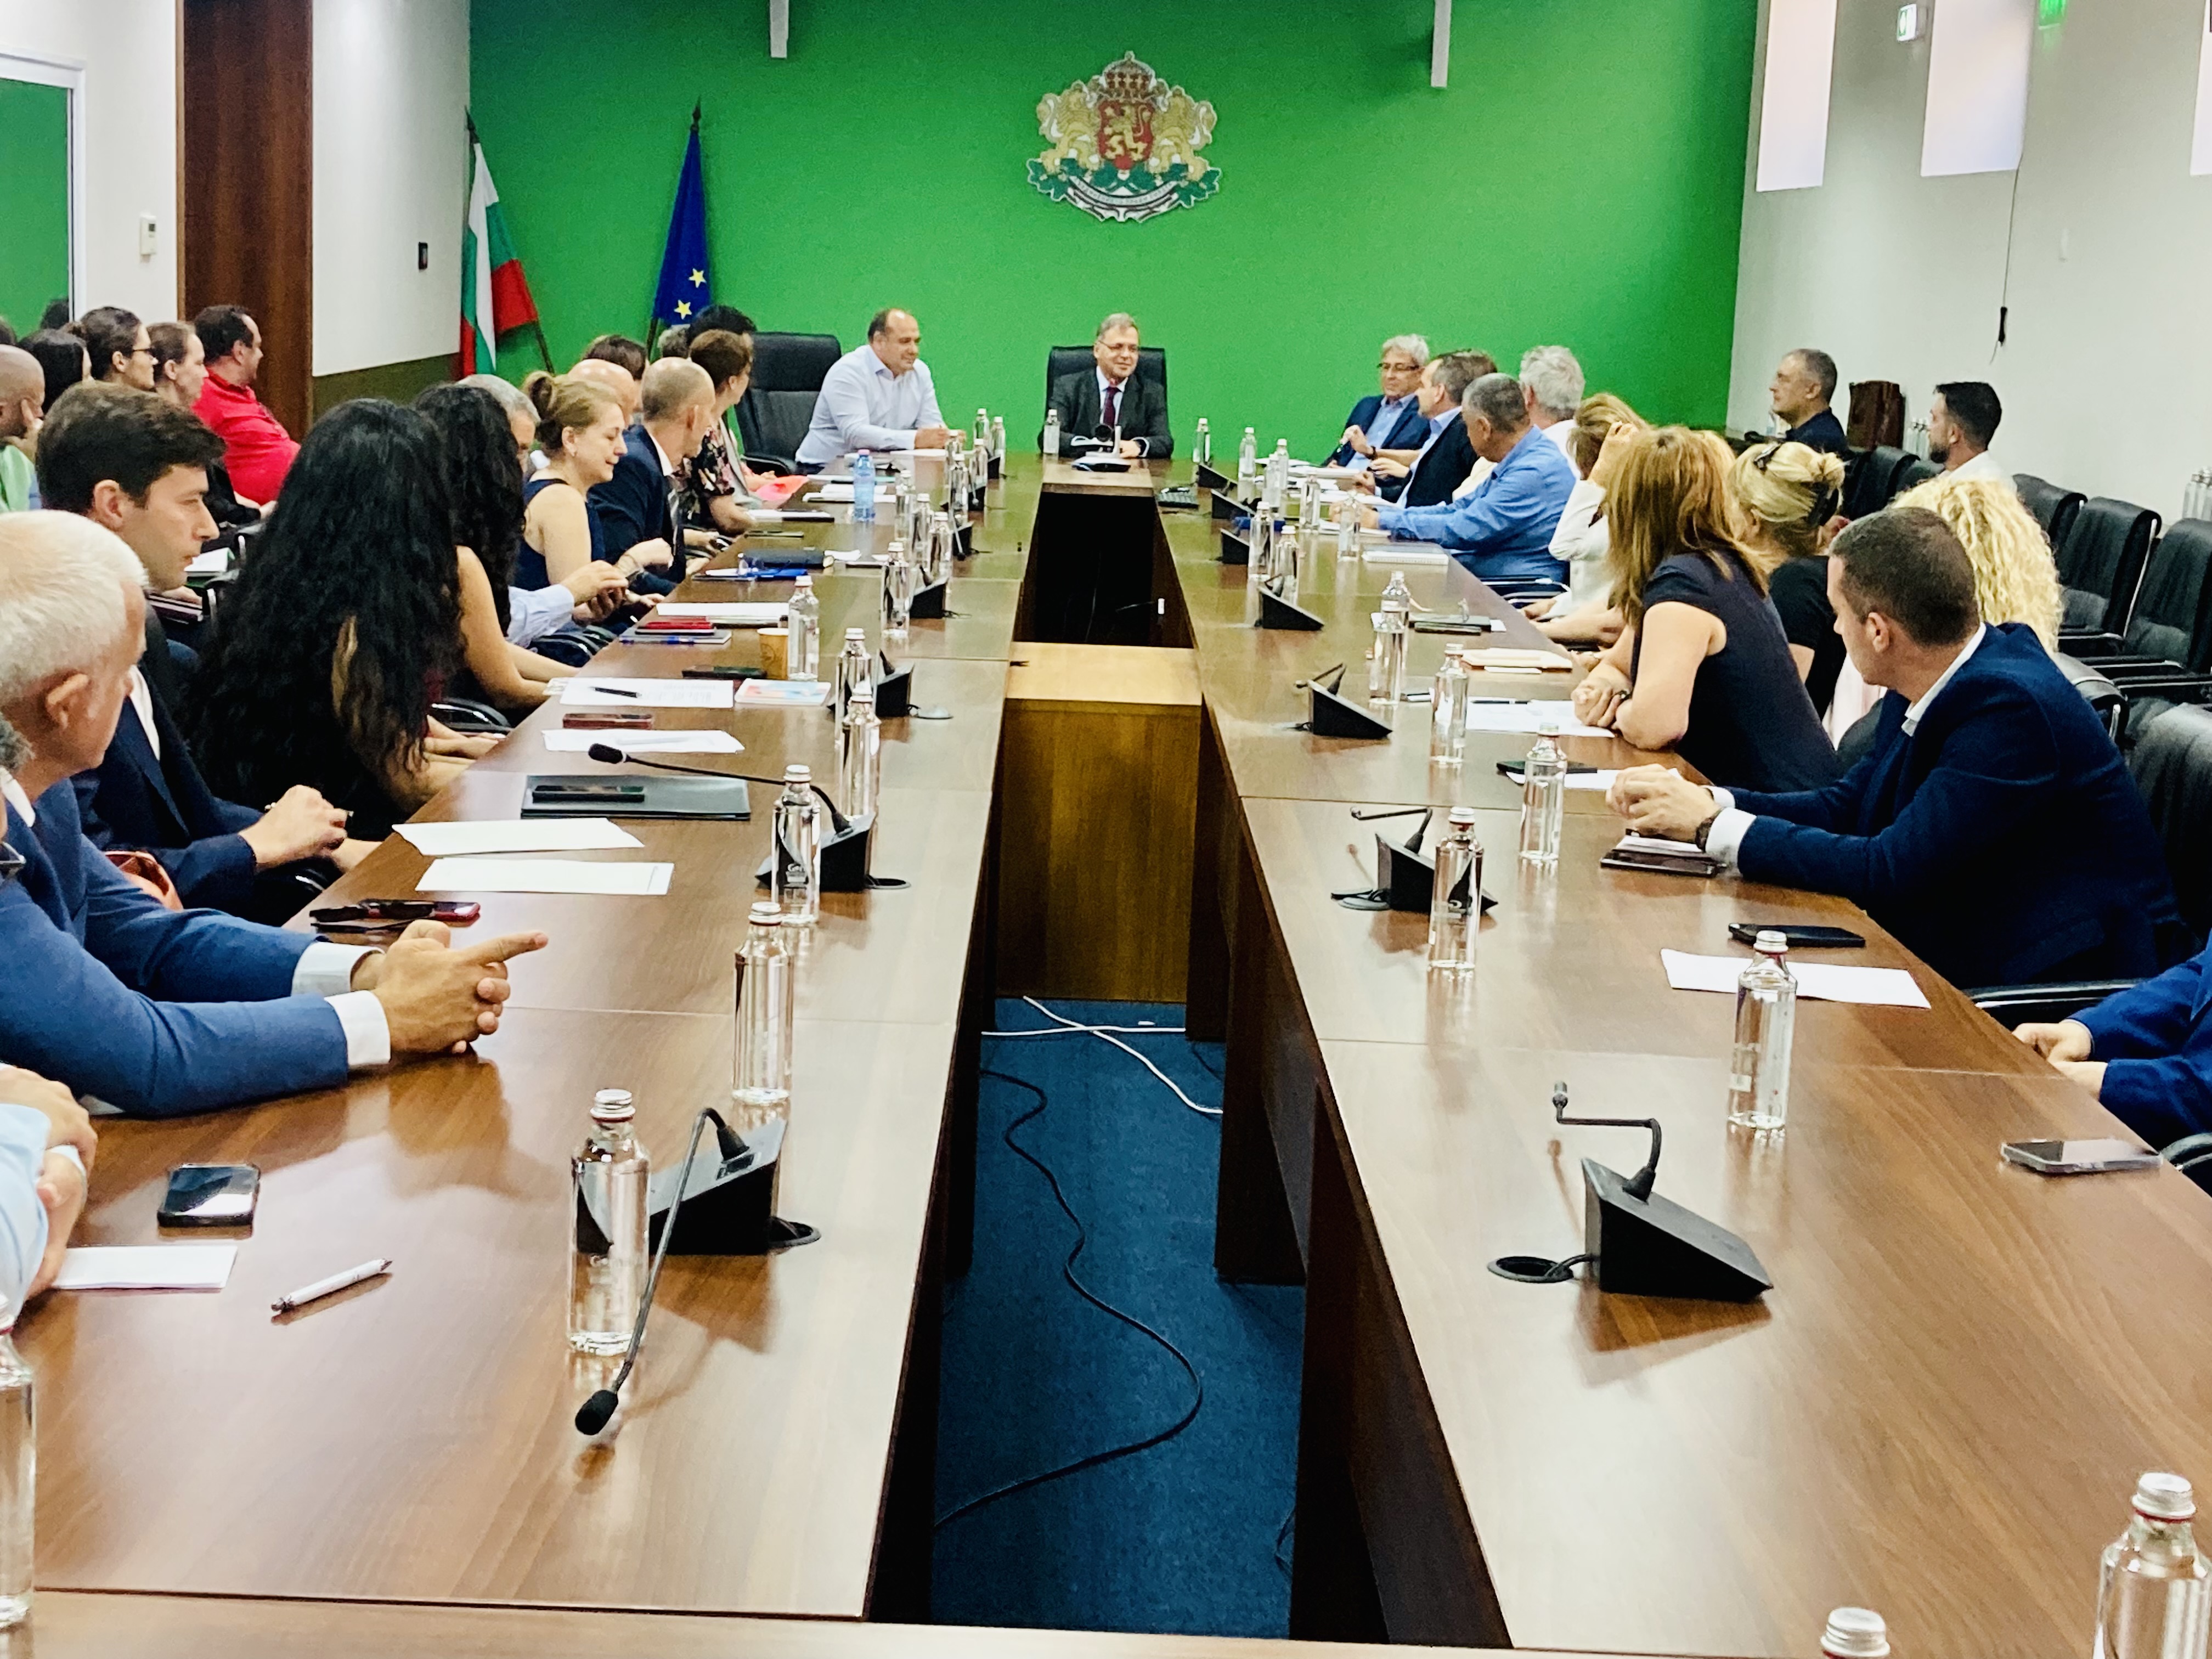 The Ministry of Education, Culture, Sports, Science and Technology, BIA and industry organizations discussed topical business topics related to environmental protection